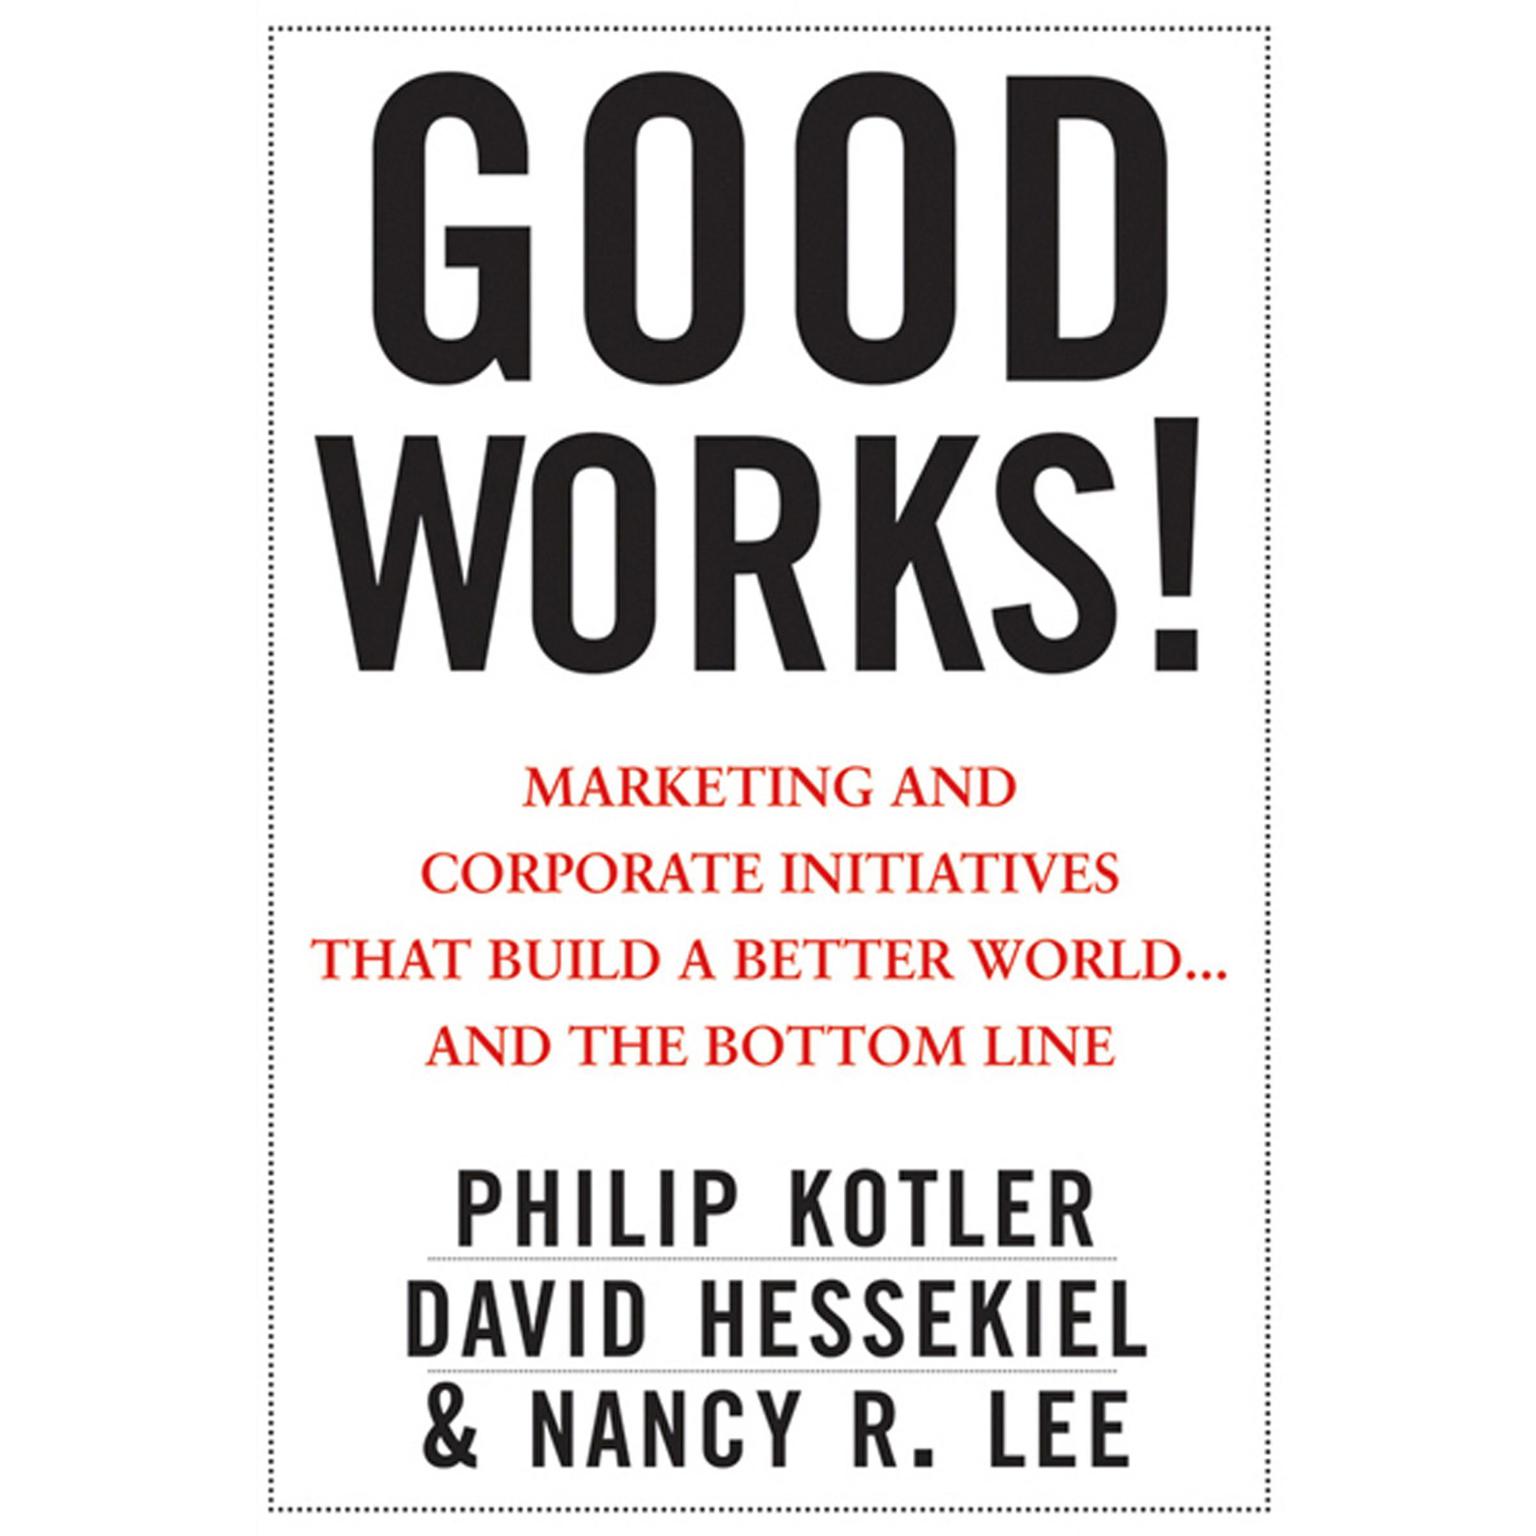 Good Works!: Marketing and Corporate Initiatives that Build a Better World...and the Bottom Line Audiobook, by Philip Kotler